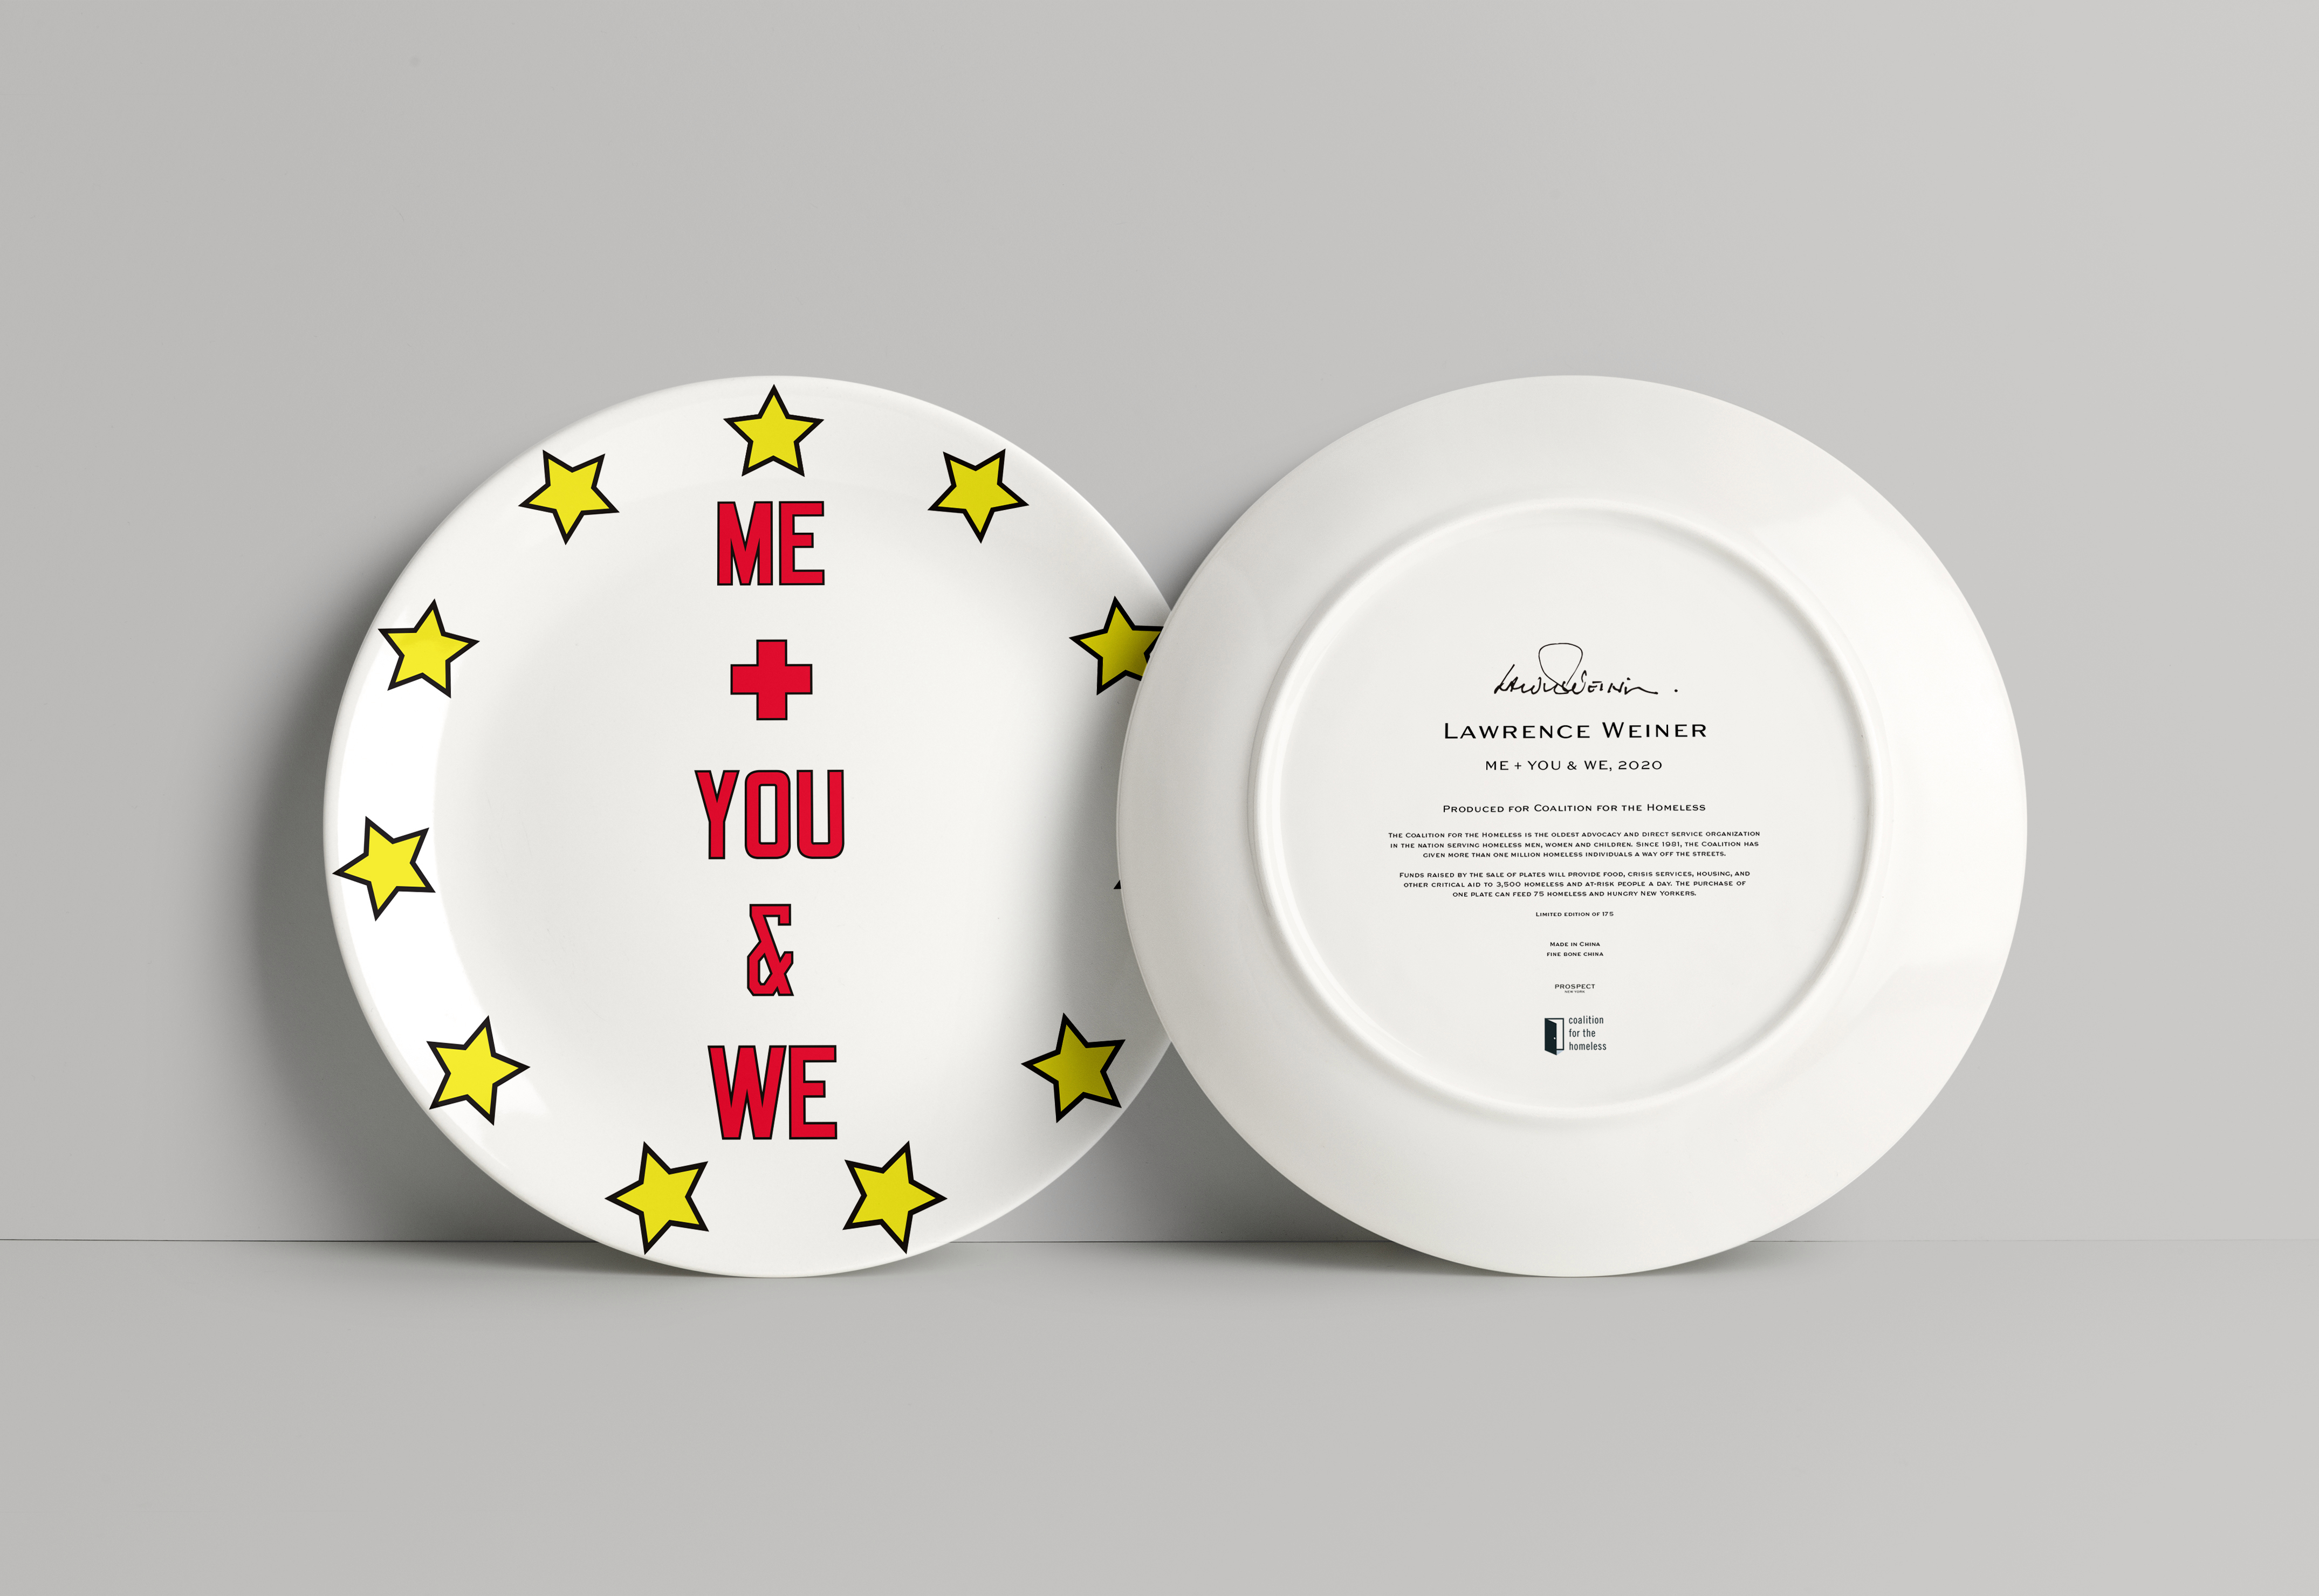 Lawrence Weiner, ME & YOU + WE, 2020 for the Coalition for the Homeless's Artist Plate Project, 2020.